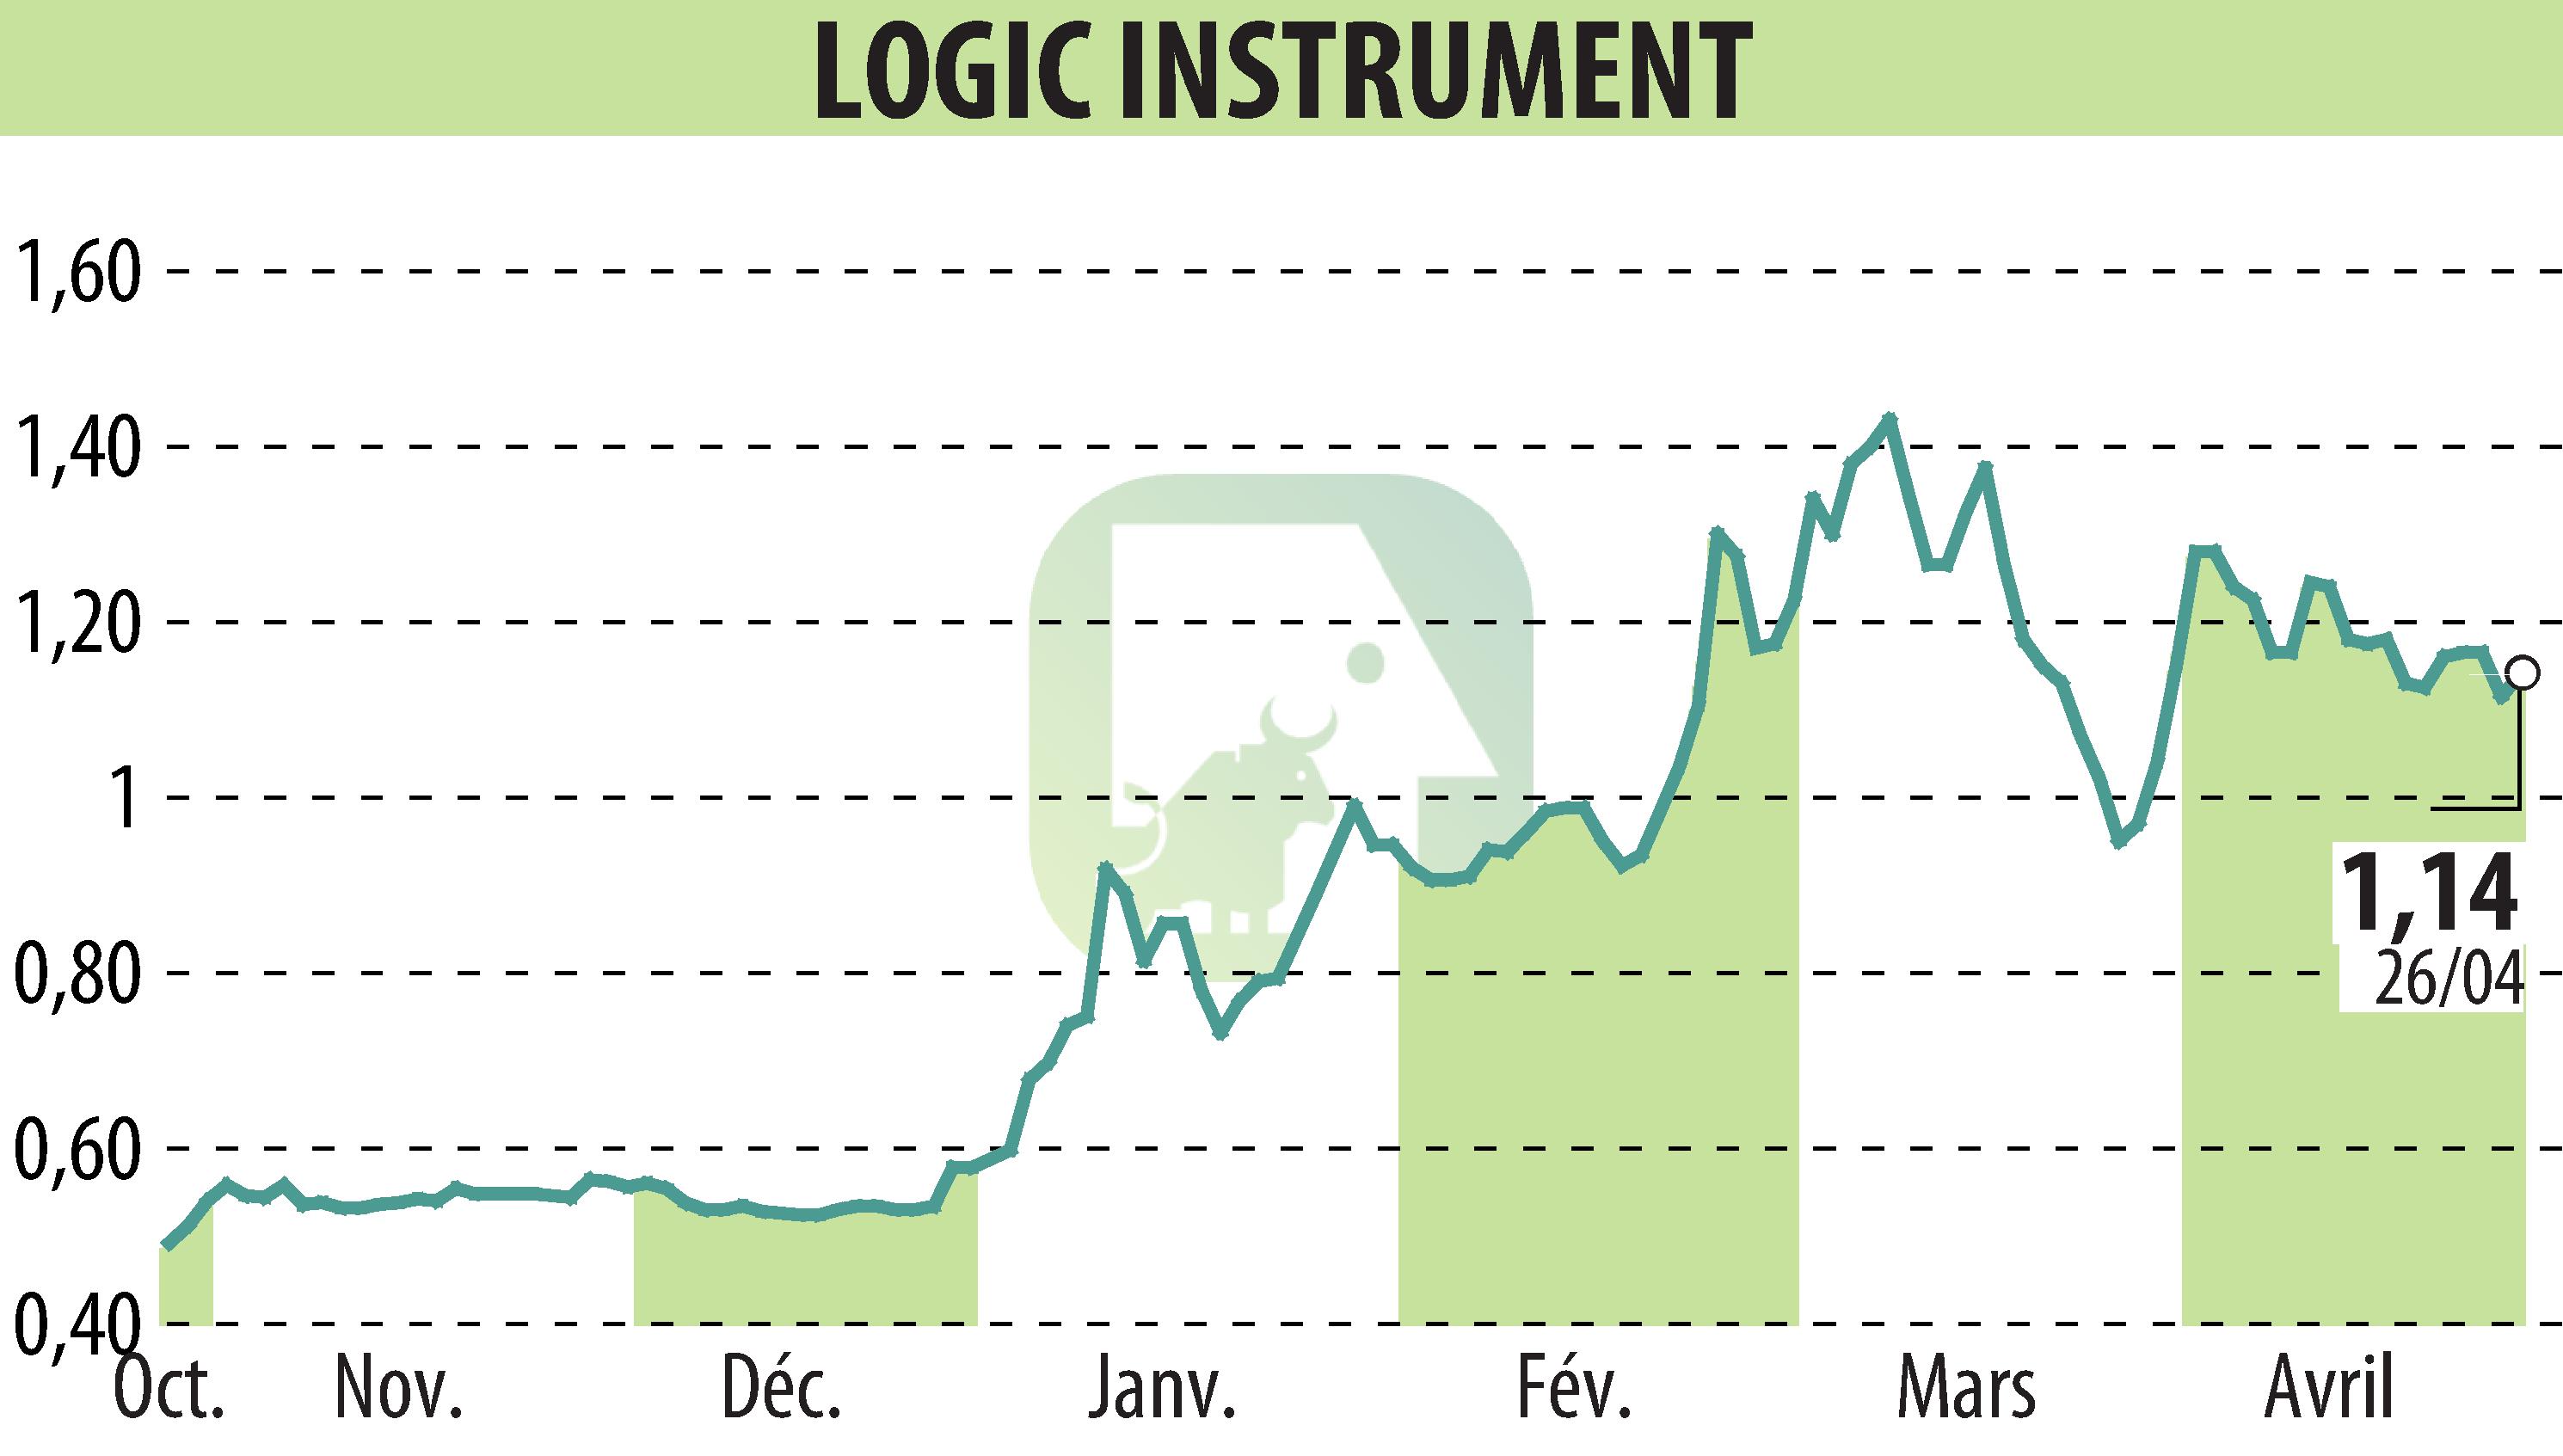 Stock price chart of LOGIC INSTRUMENT (EPA:ALLOG) showing fluctuations.